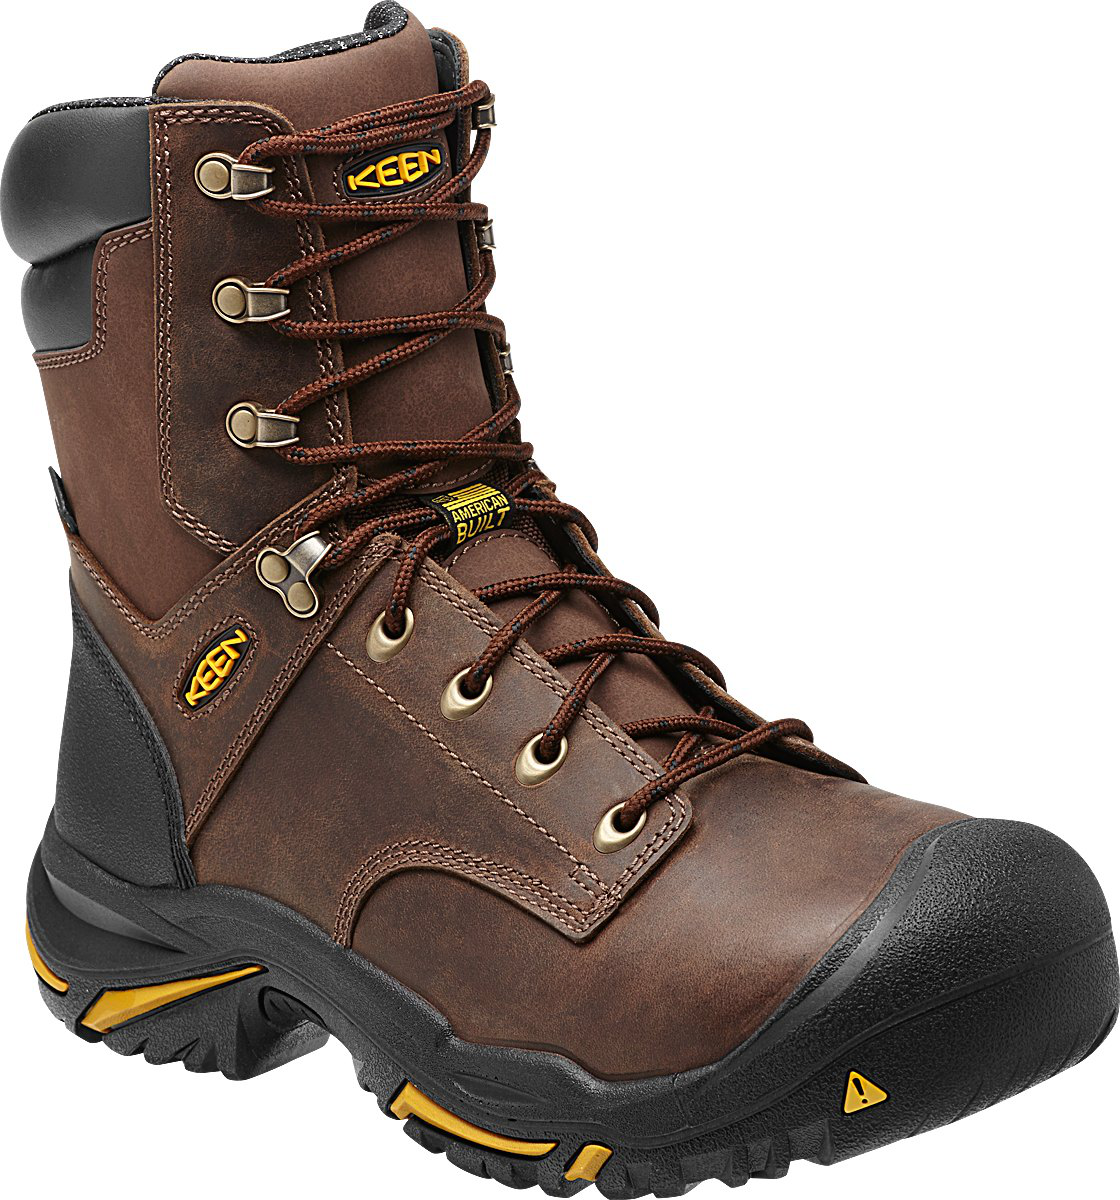 Keen's fall work boot lineup inclues new breathable and insulated